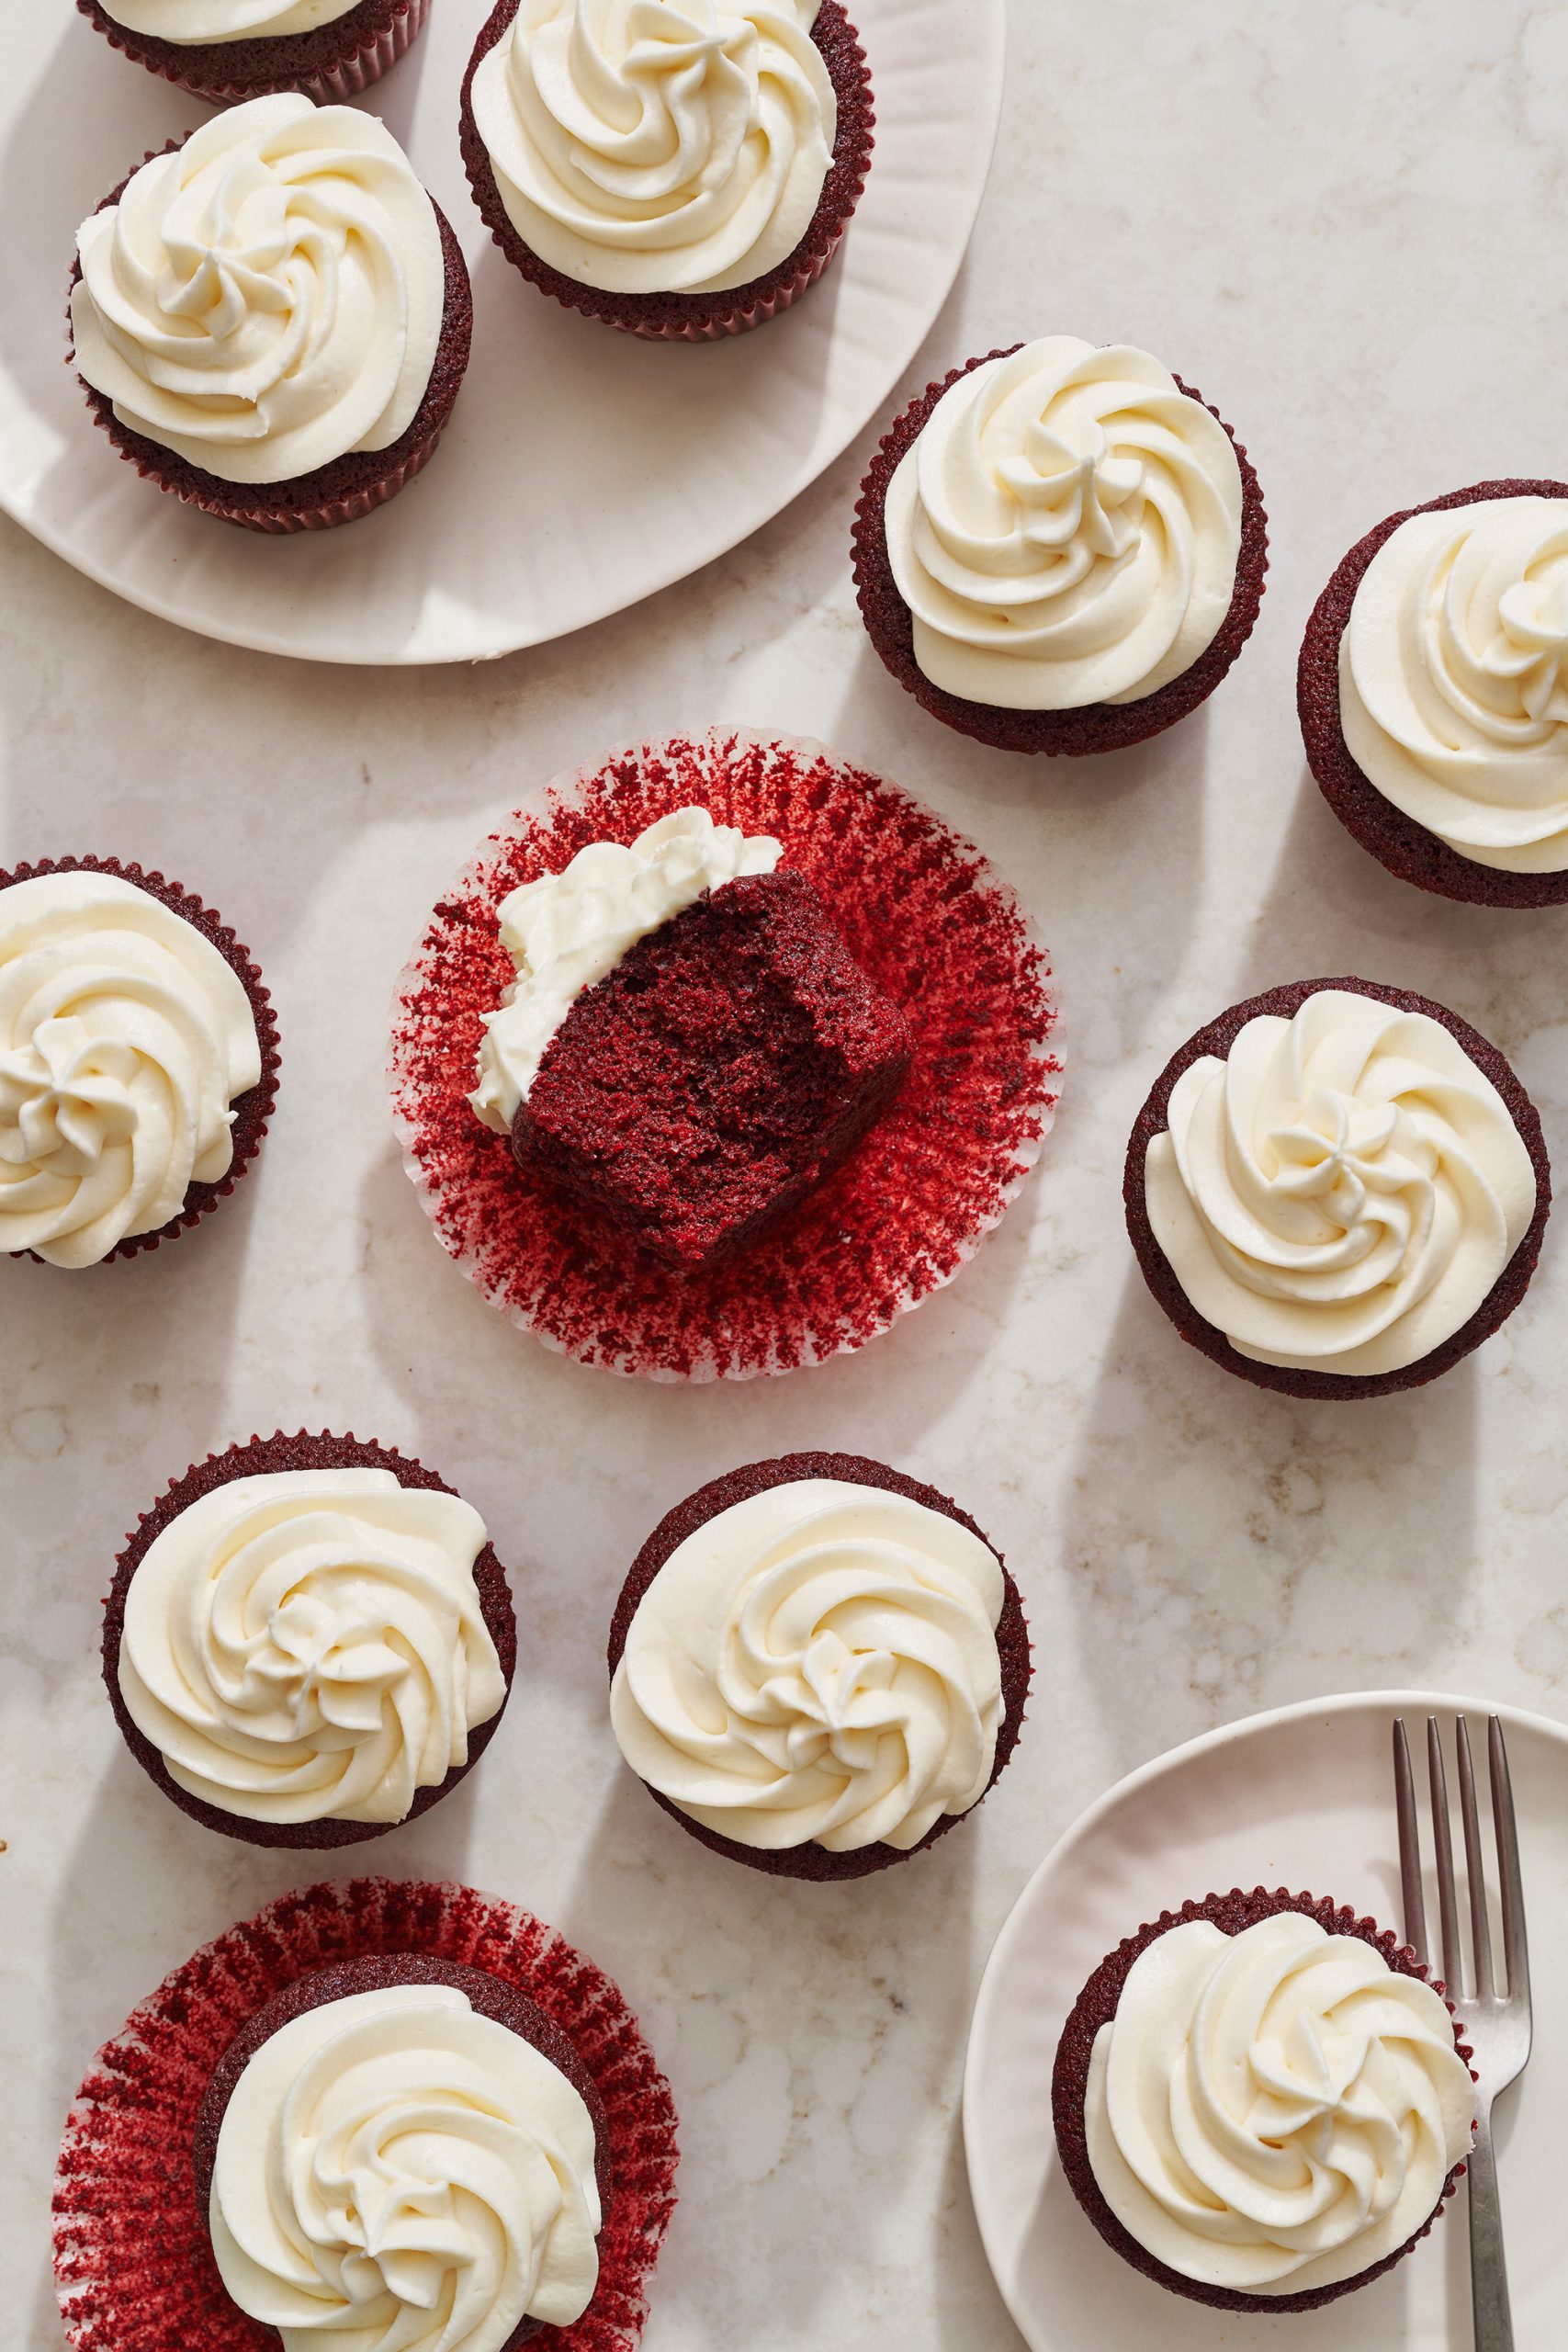 an assortment of red velvet cupcakes, iced with swirls of cream cheese frosting, on white plates ready to serve.